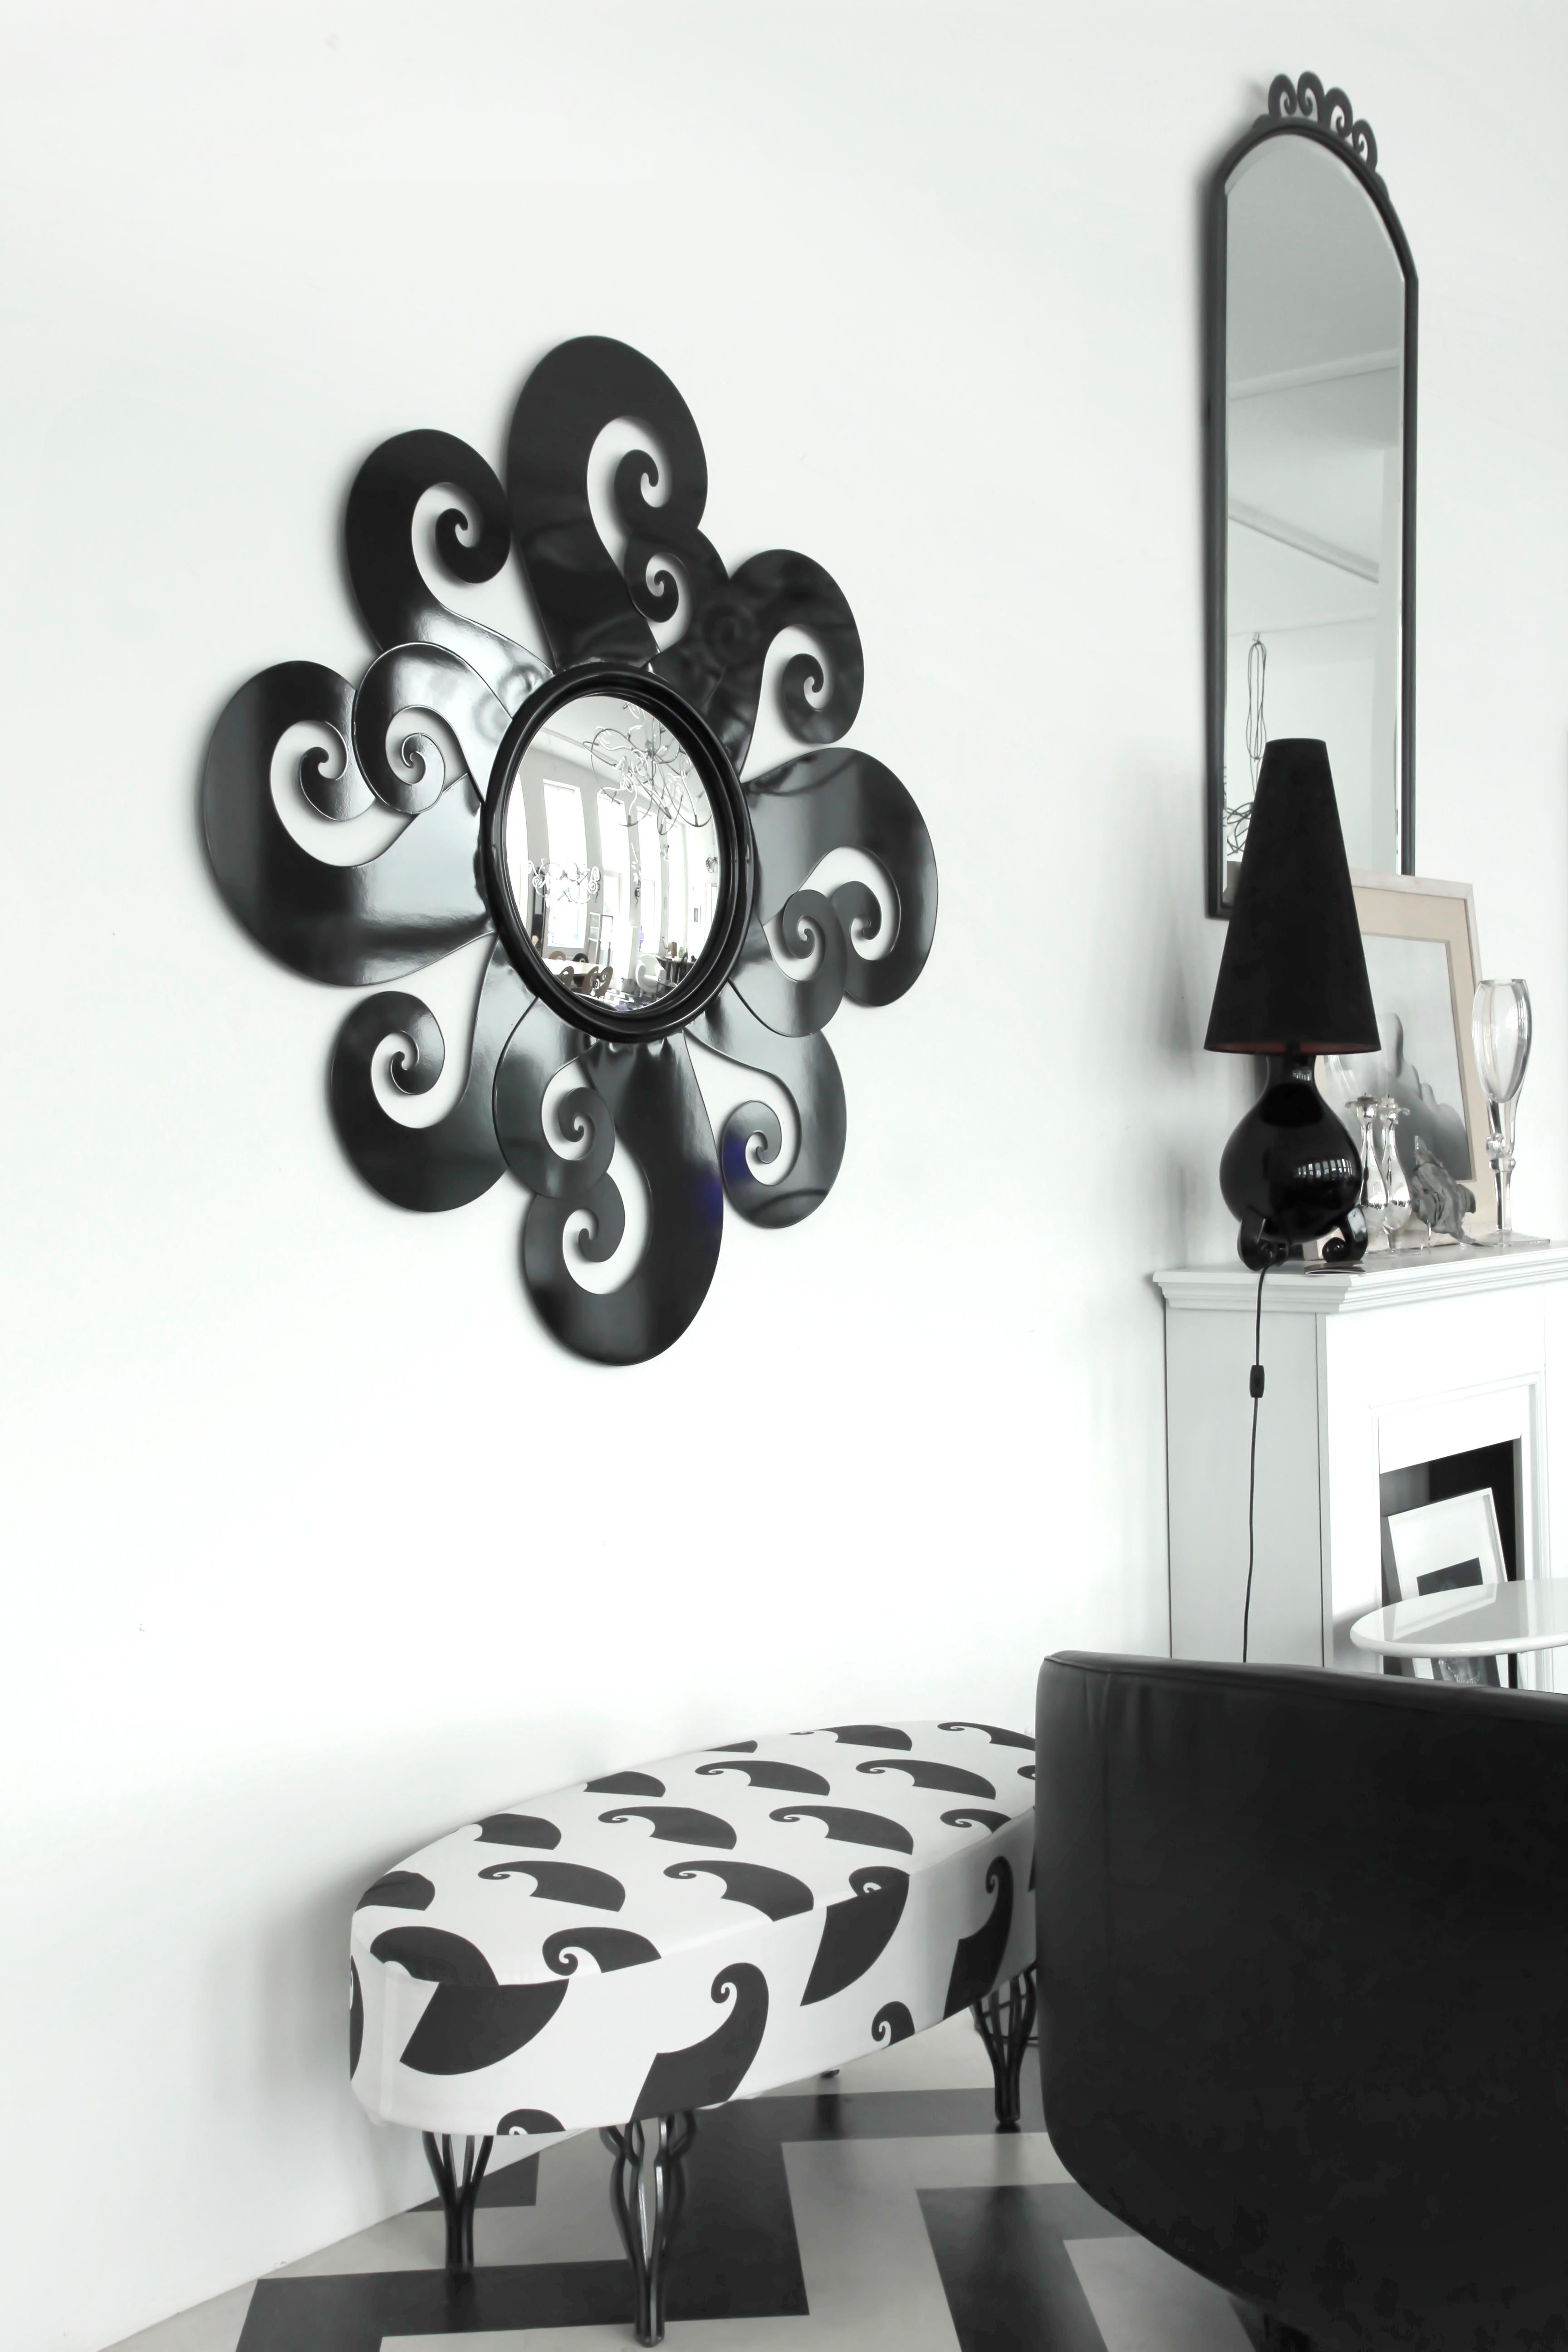 Only two pieces made, hand made one of a kind mirror. Mirror glass diameter 45cm, complete object 130cm.